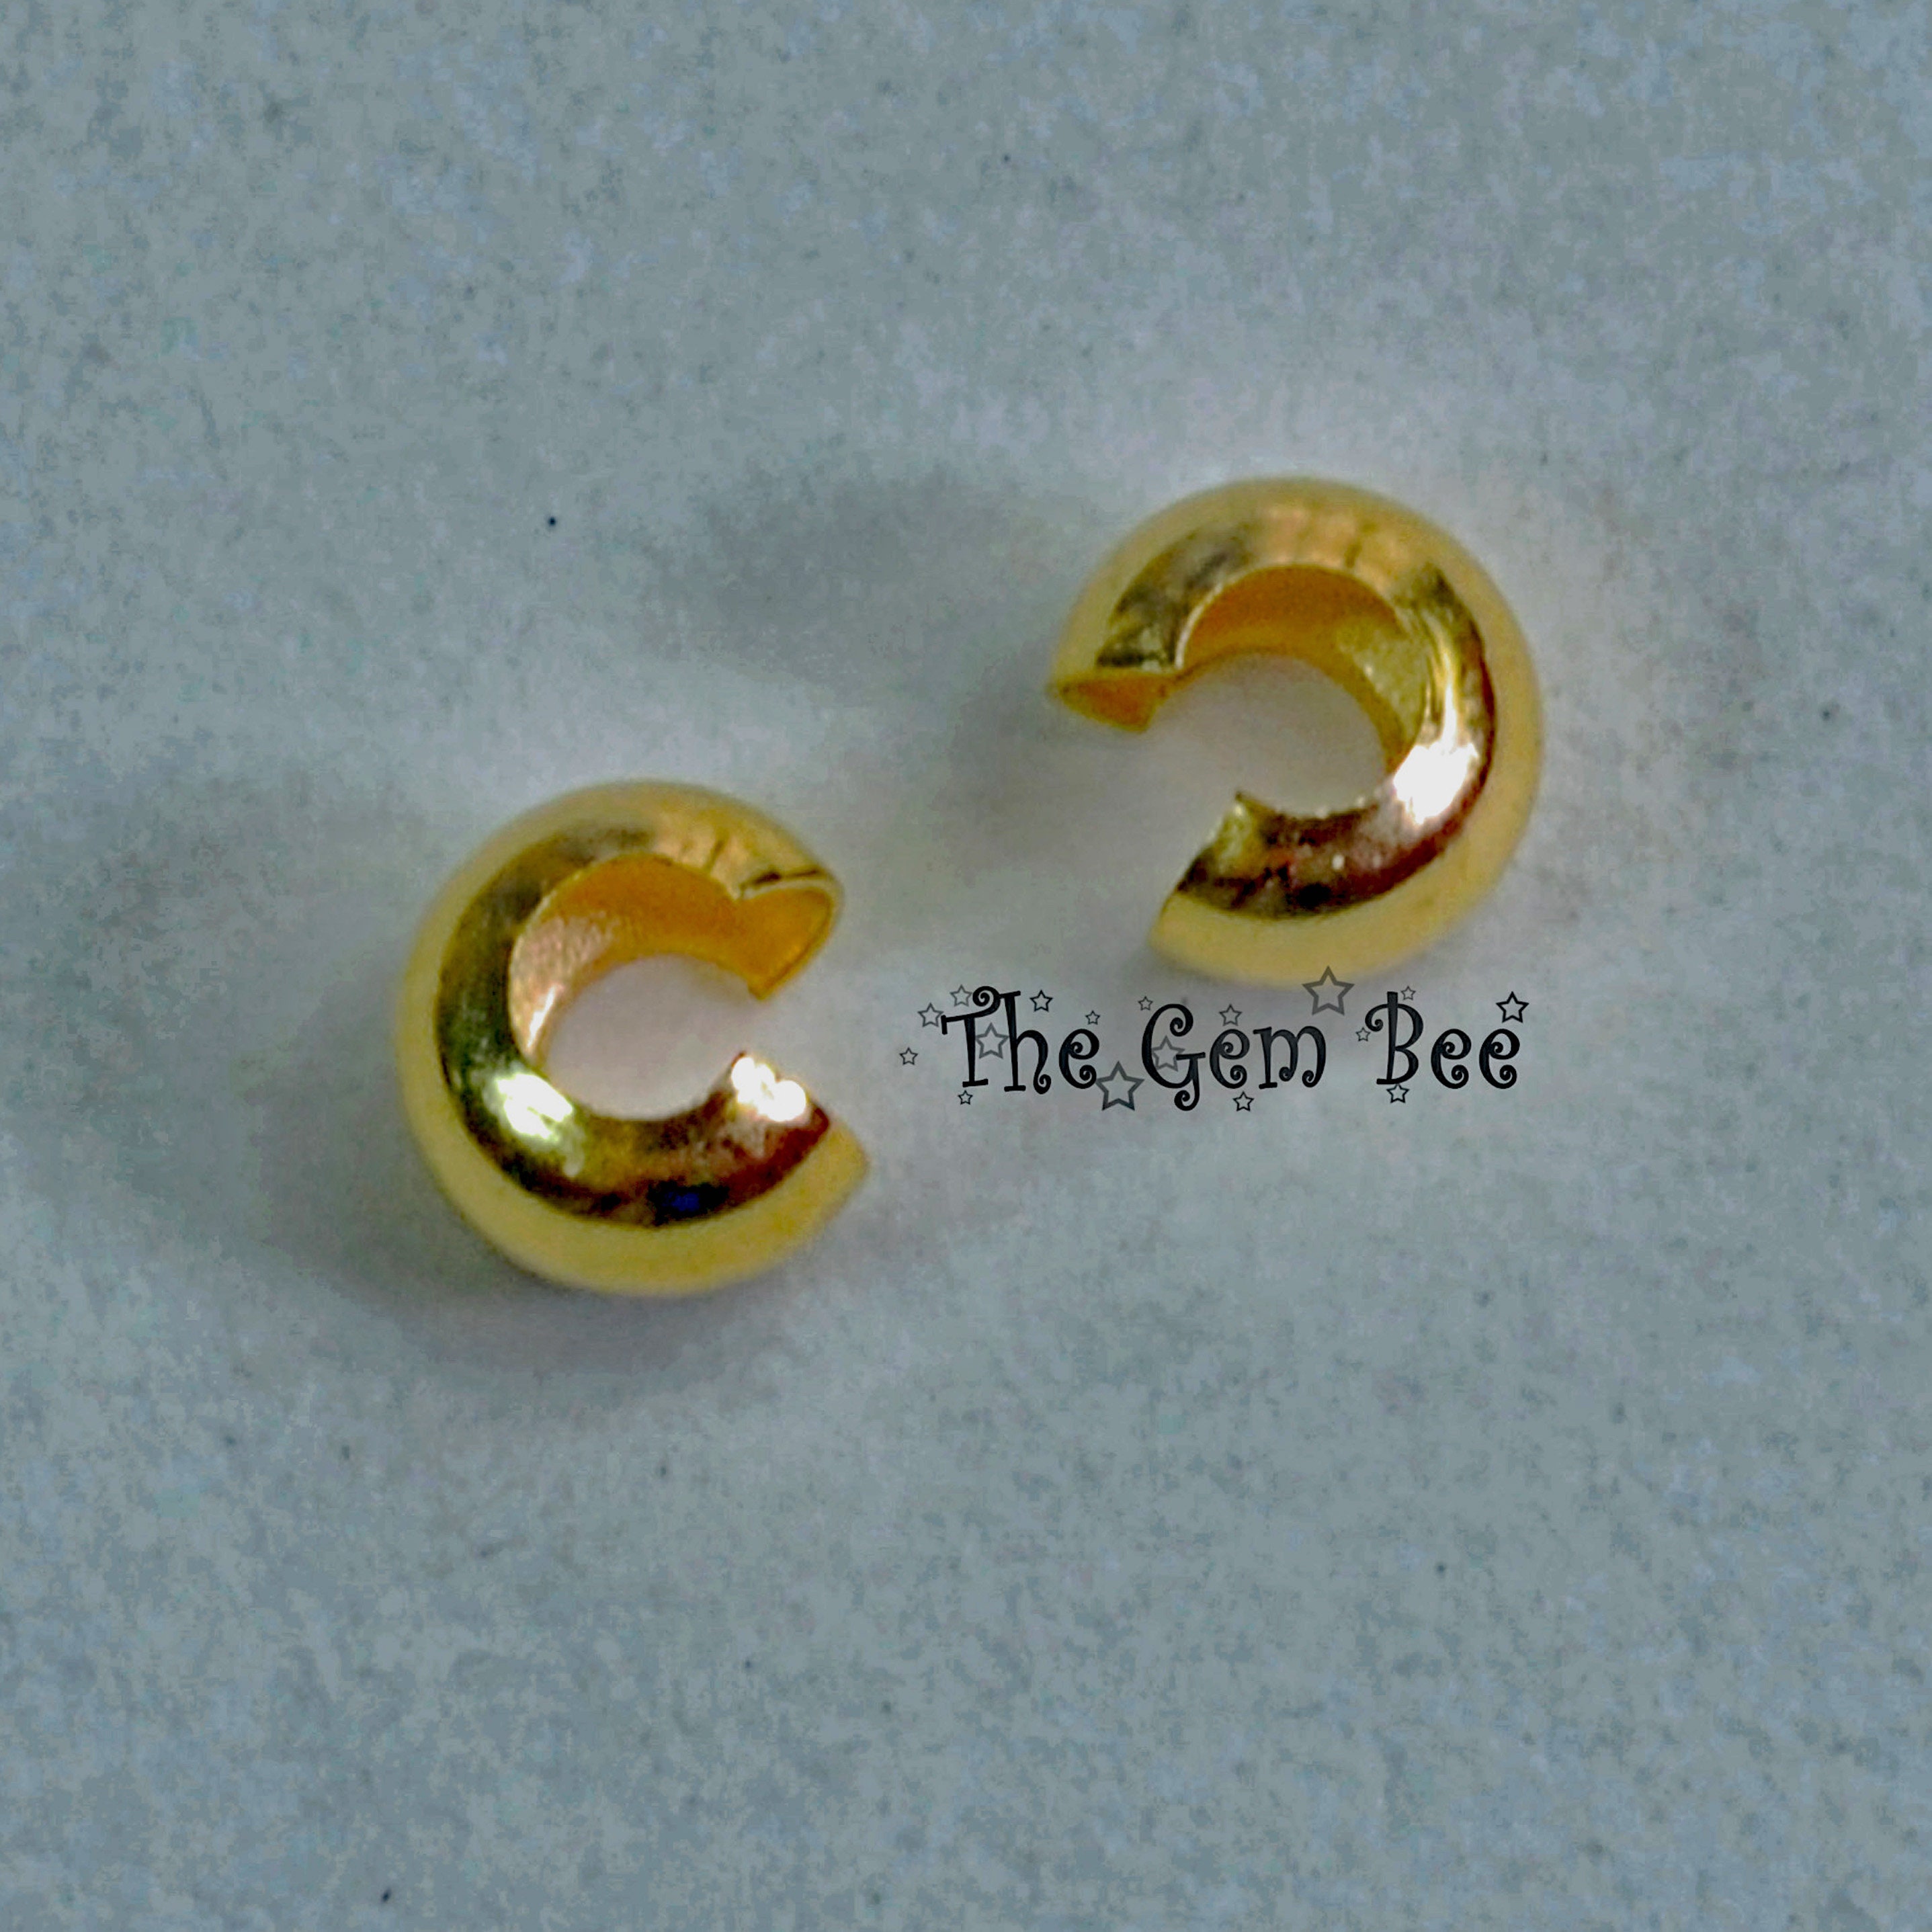 18k Gold Decorative Crimp Bead Cover • 3mm • Tiny Flower Accent • Solid 18  Carat Gold • Handmade Crimp Covers